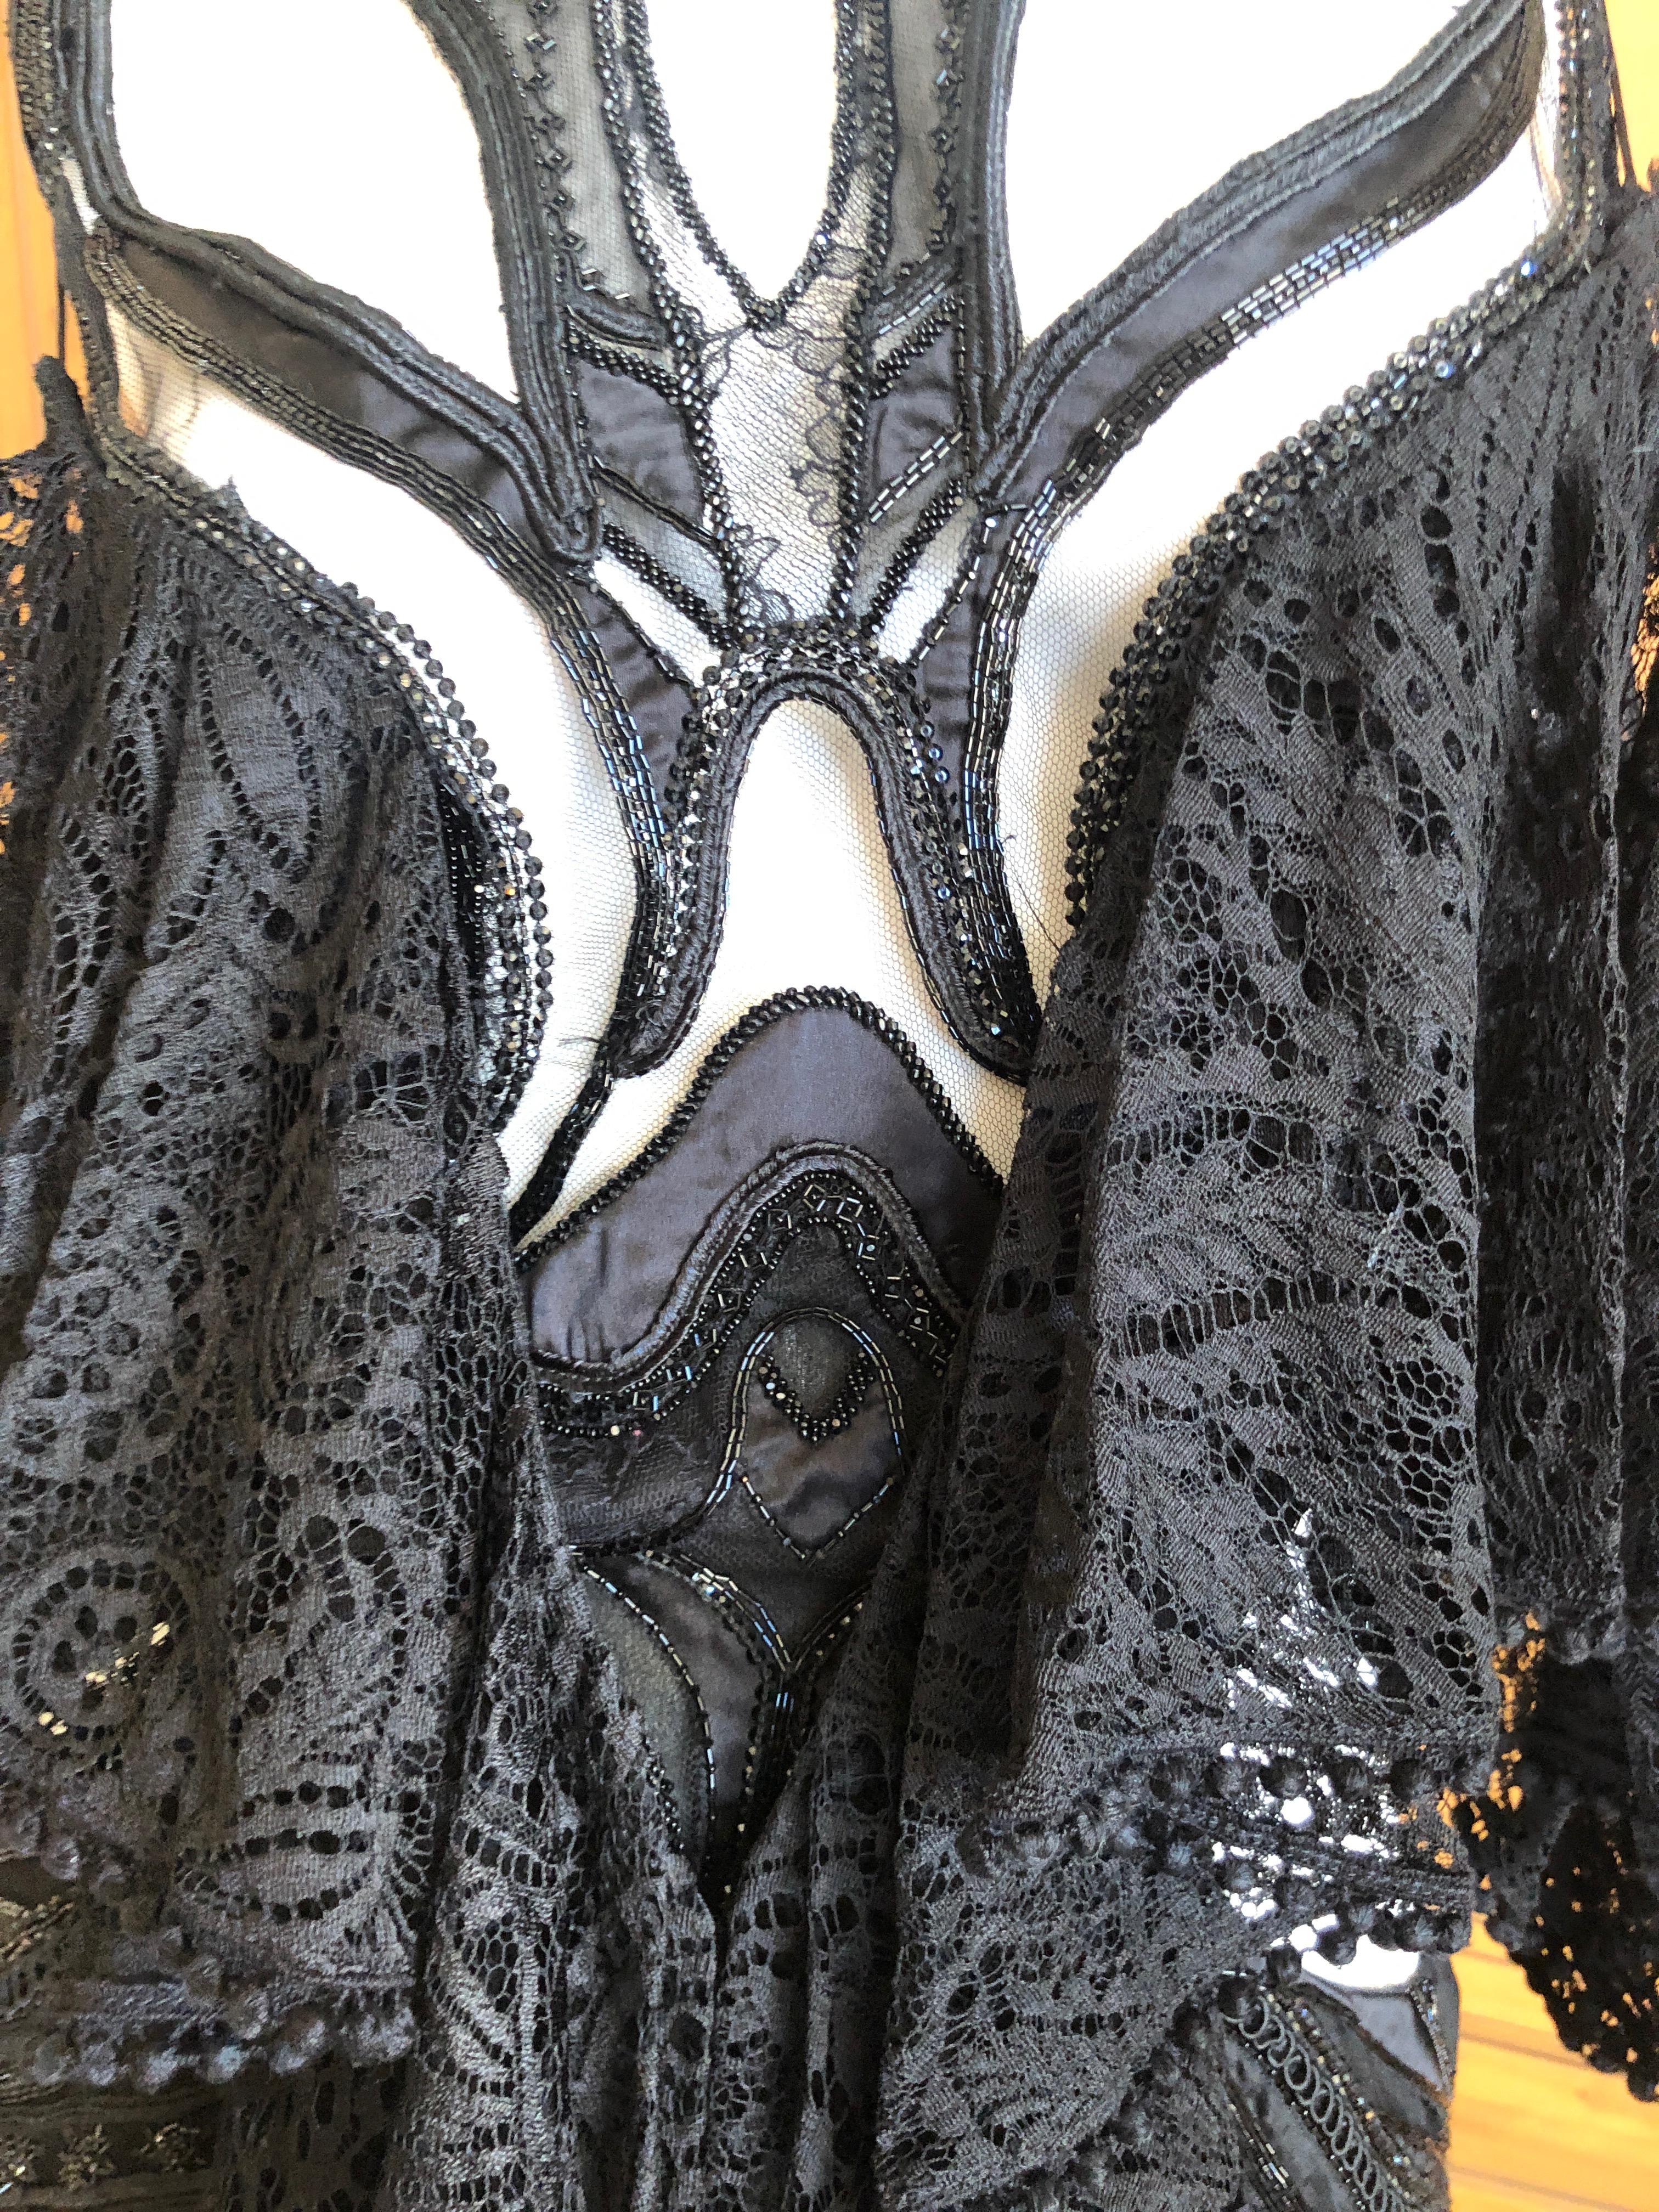 Alexander McQueen Pre Fall 2018 Goth Black Lace Beaded Dress by Sarah Burton For Sale 5